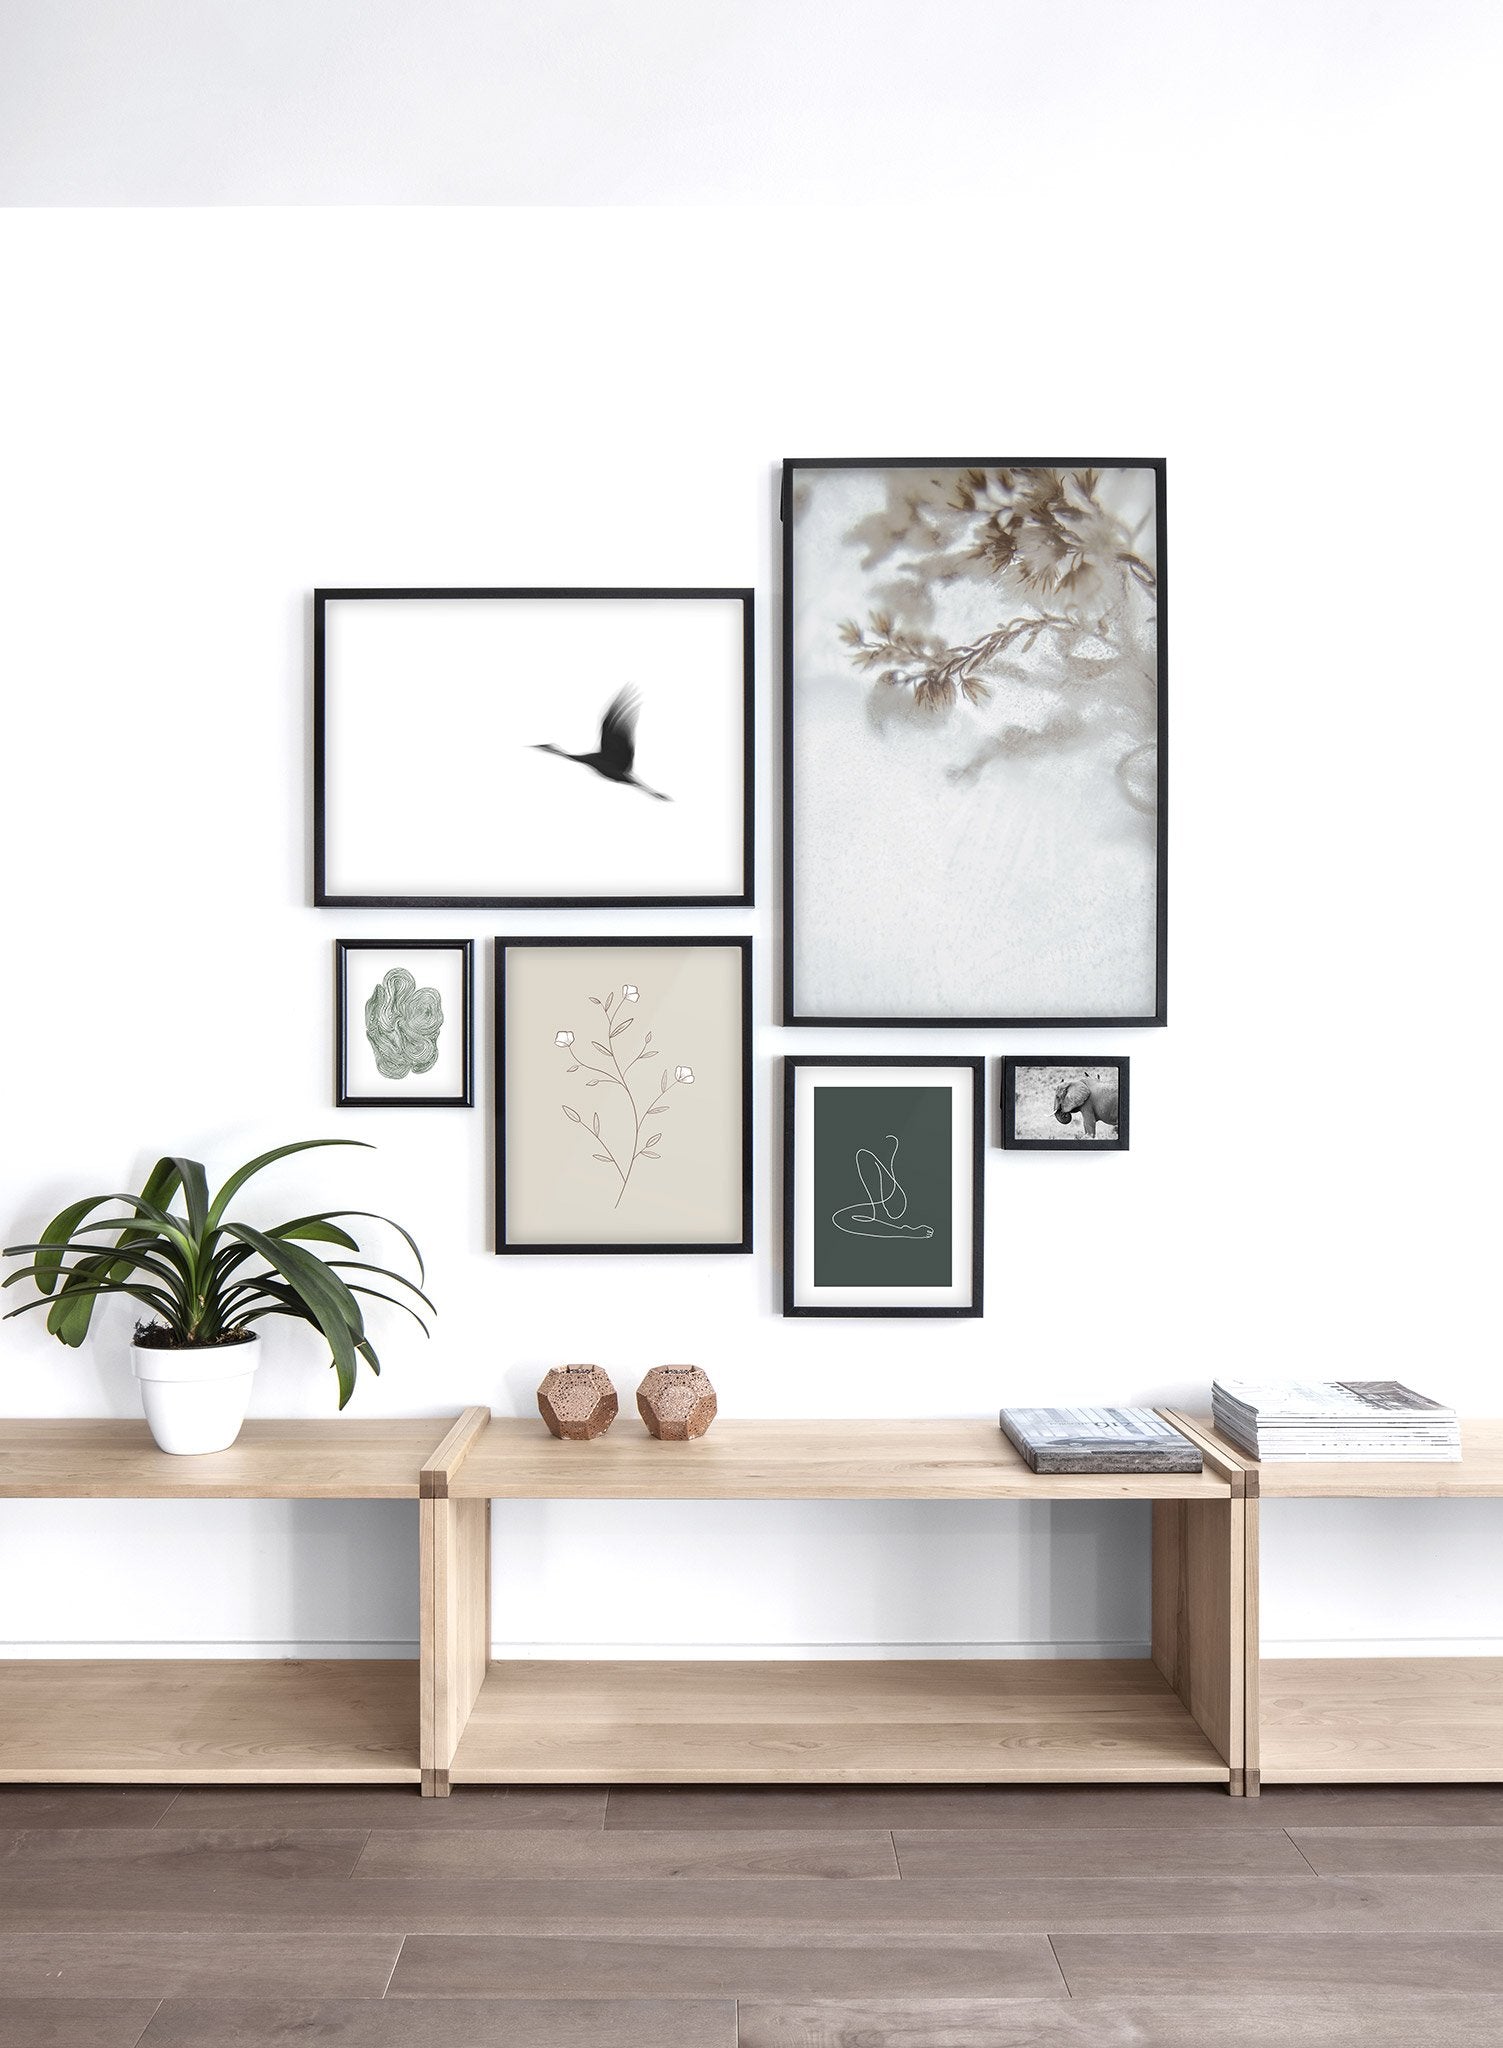 Modern minimalist botanical illustration poster by Opposite Wall with White Petals - Lifestyle Gallery - Living Room